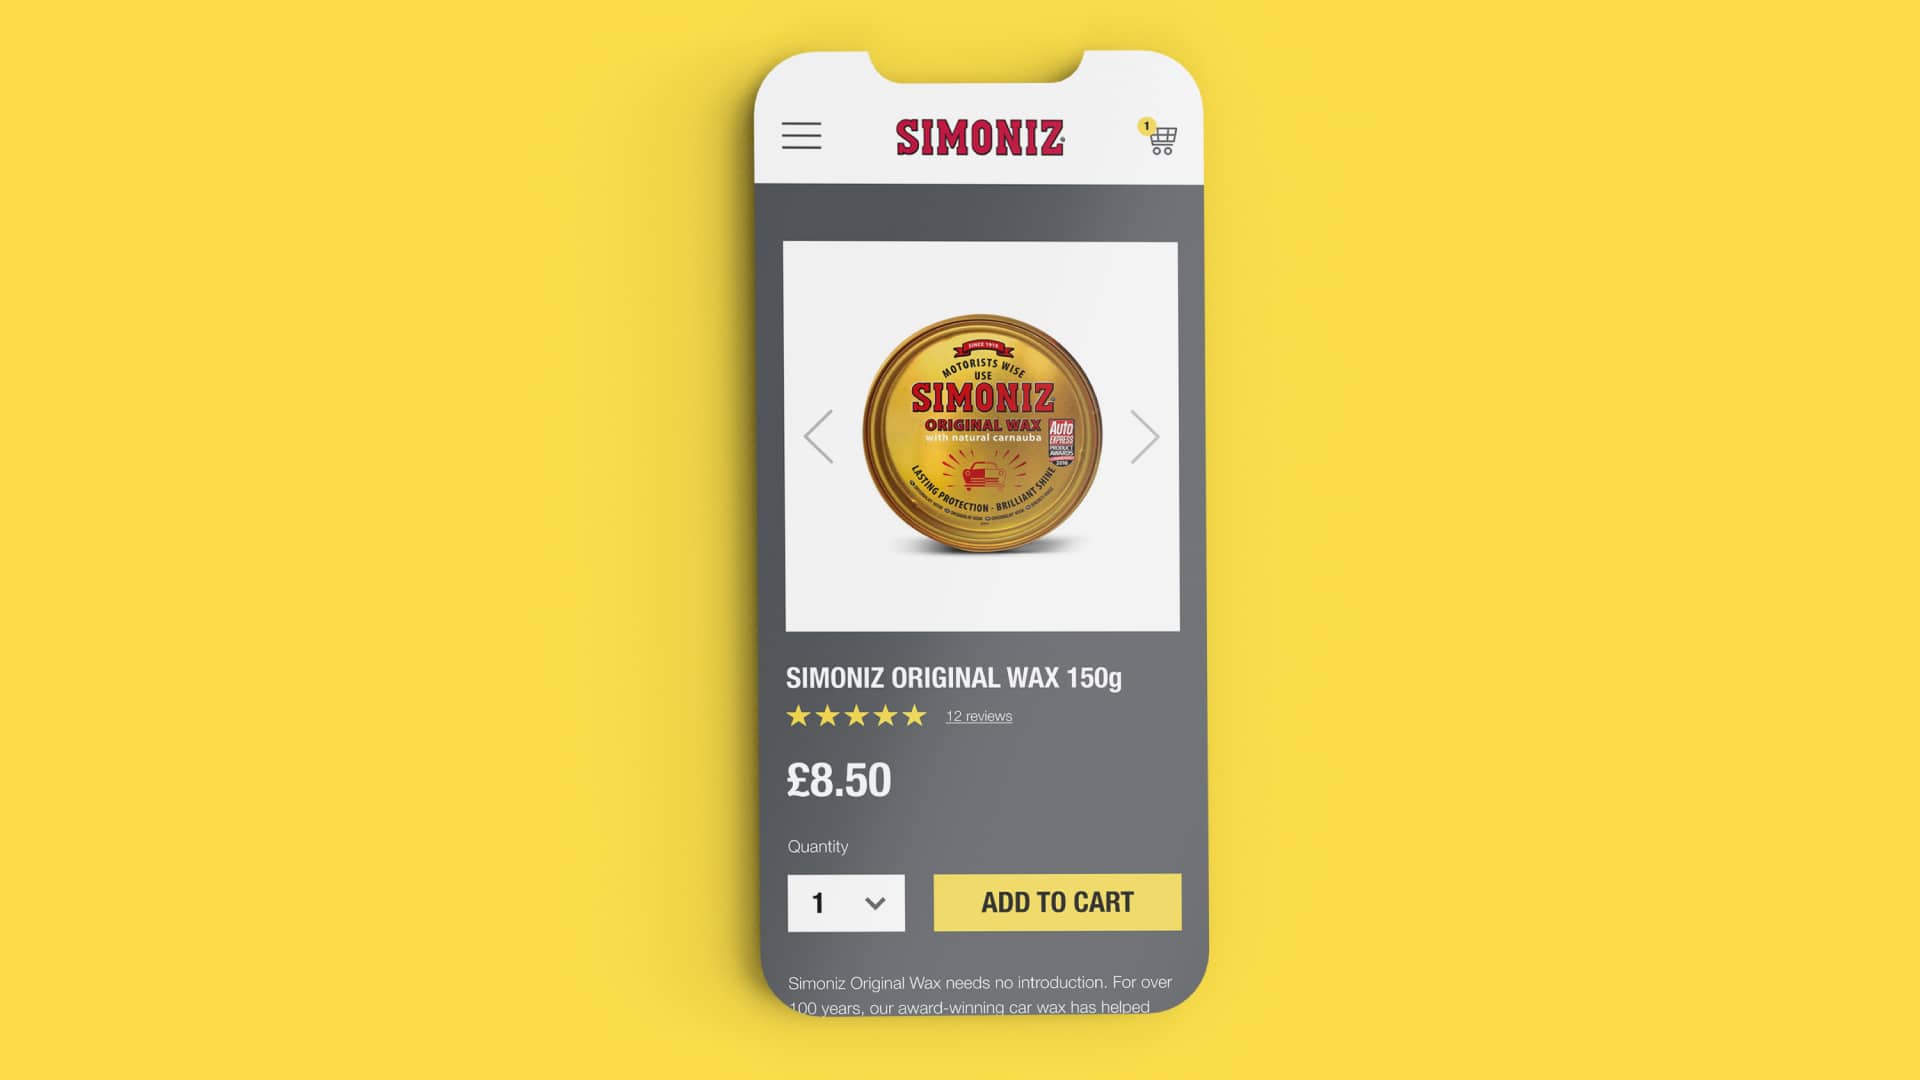 Phone shaped screenshot of a Simoniz product page on a bright yellow background